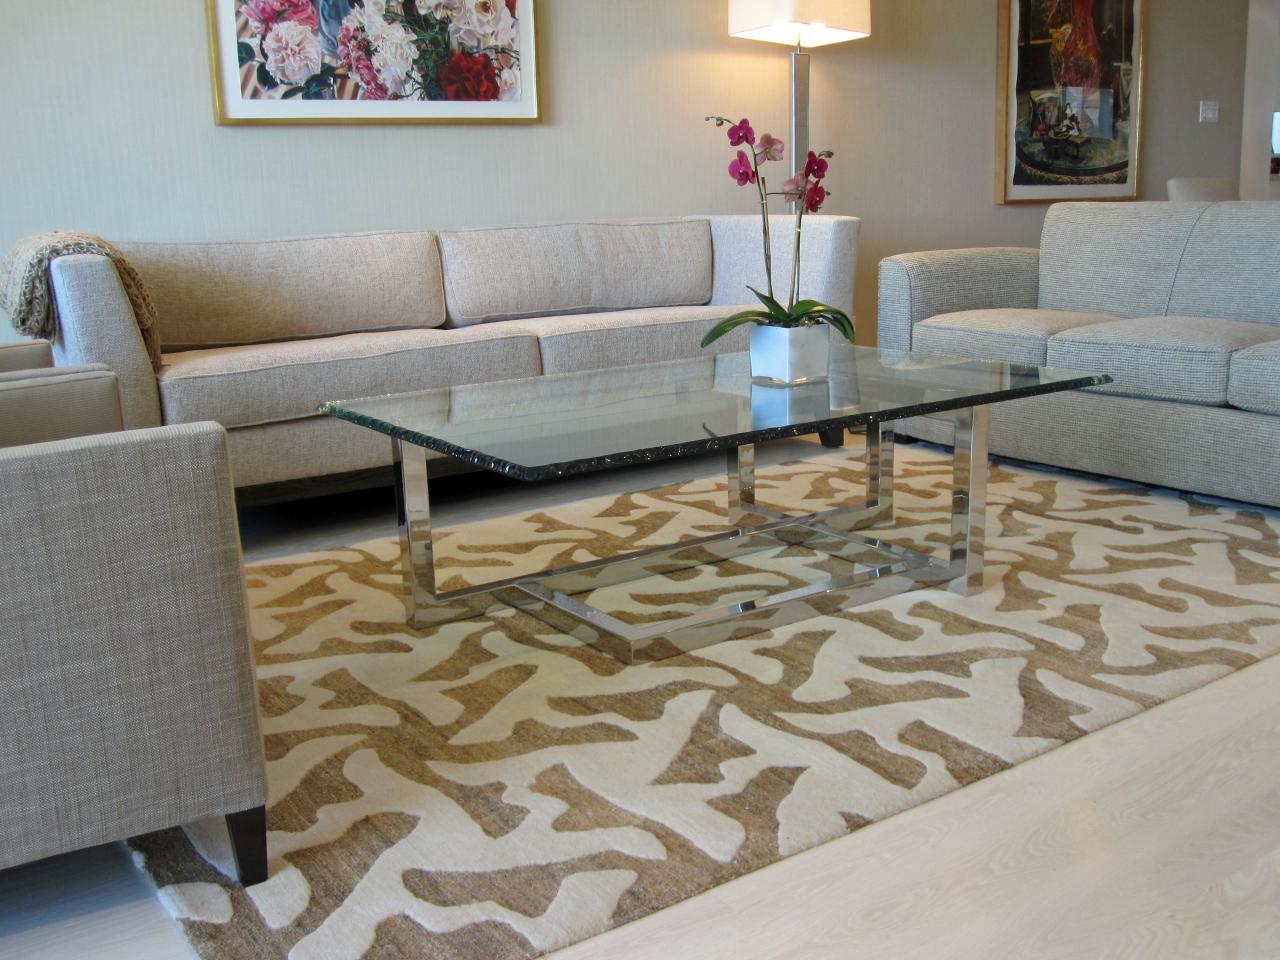 How To Choose Your Living Room Rug, What Kind Of Rug Is Best For Living Room